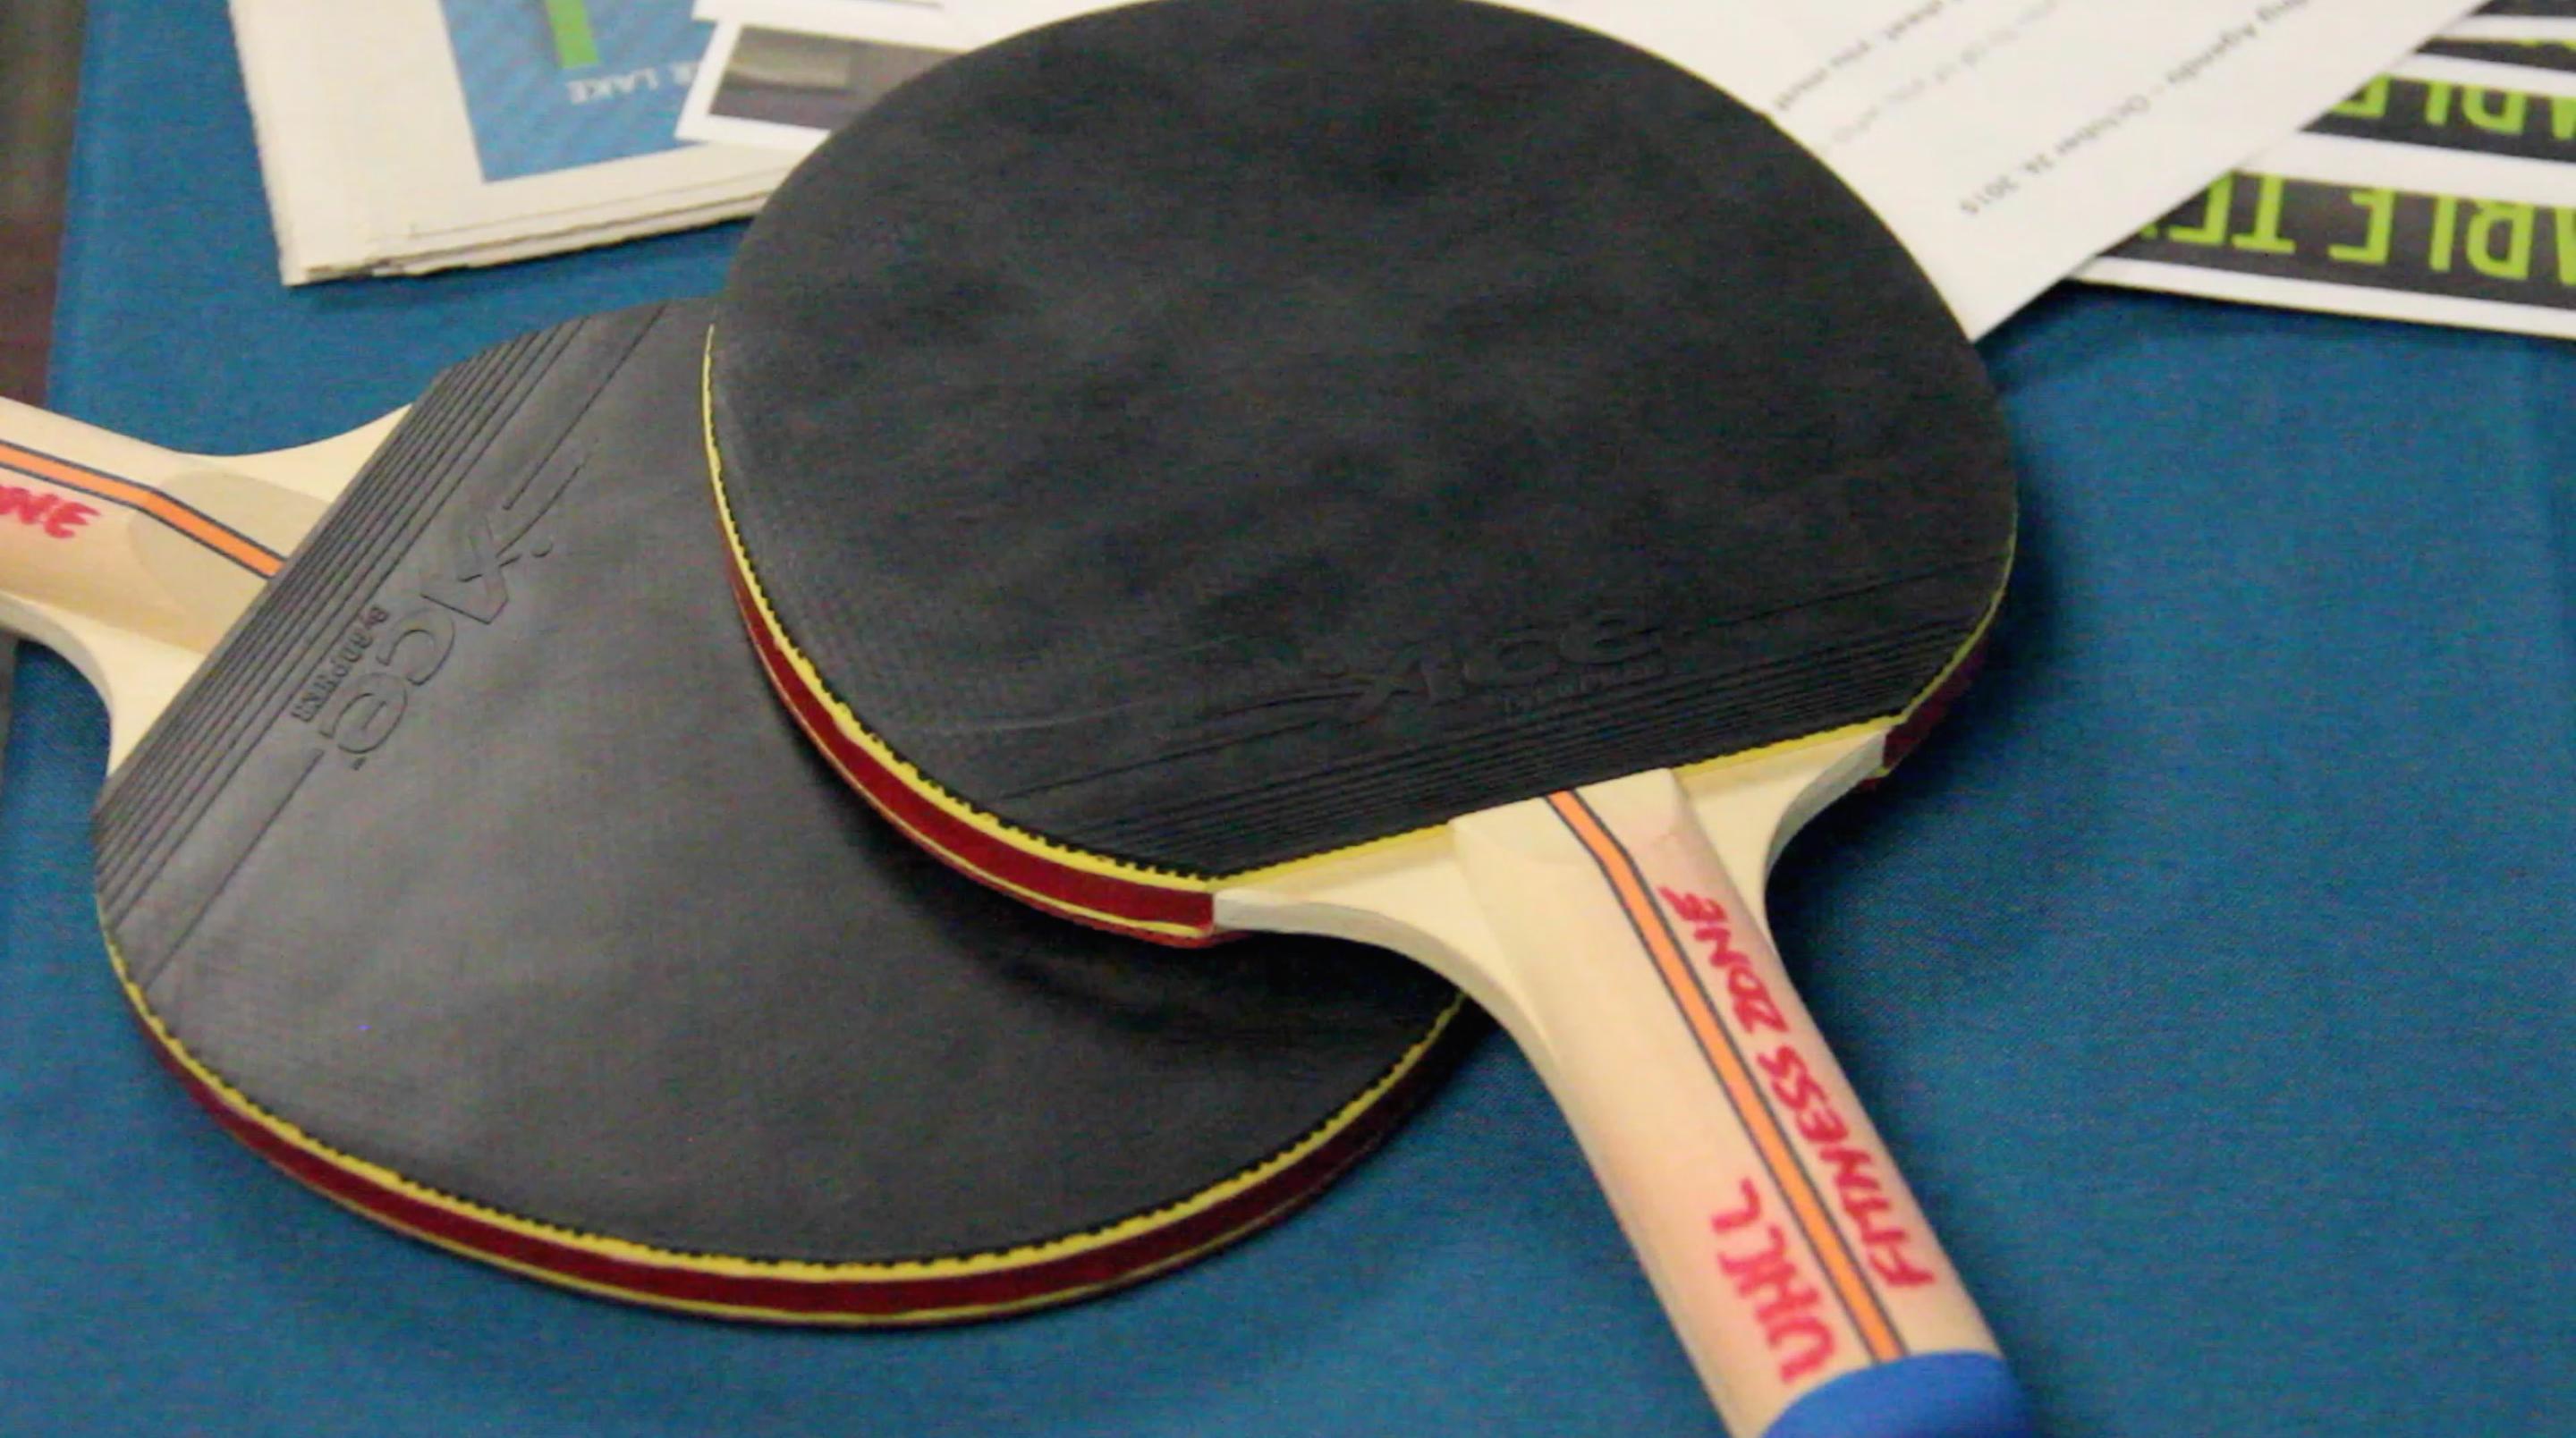 Image: Two table tennis paddles sit against a blue background. Photo by The Signal reporter Kyle Harrison.